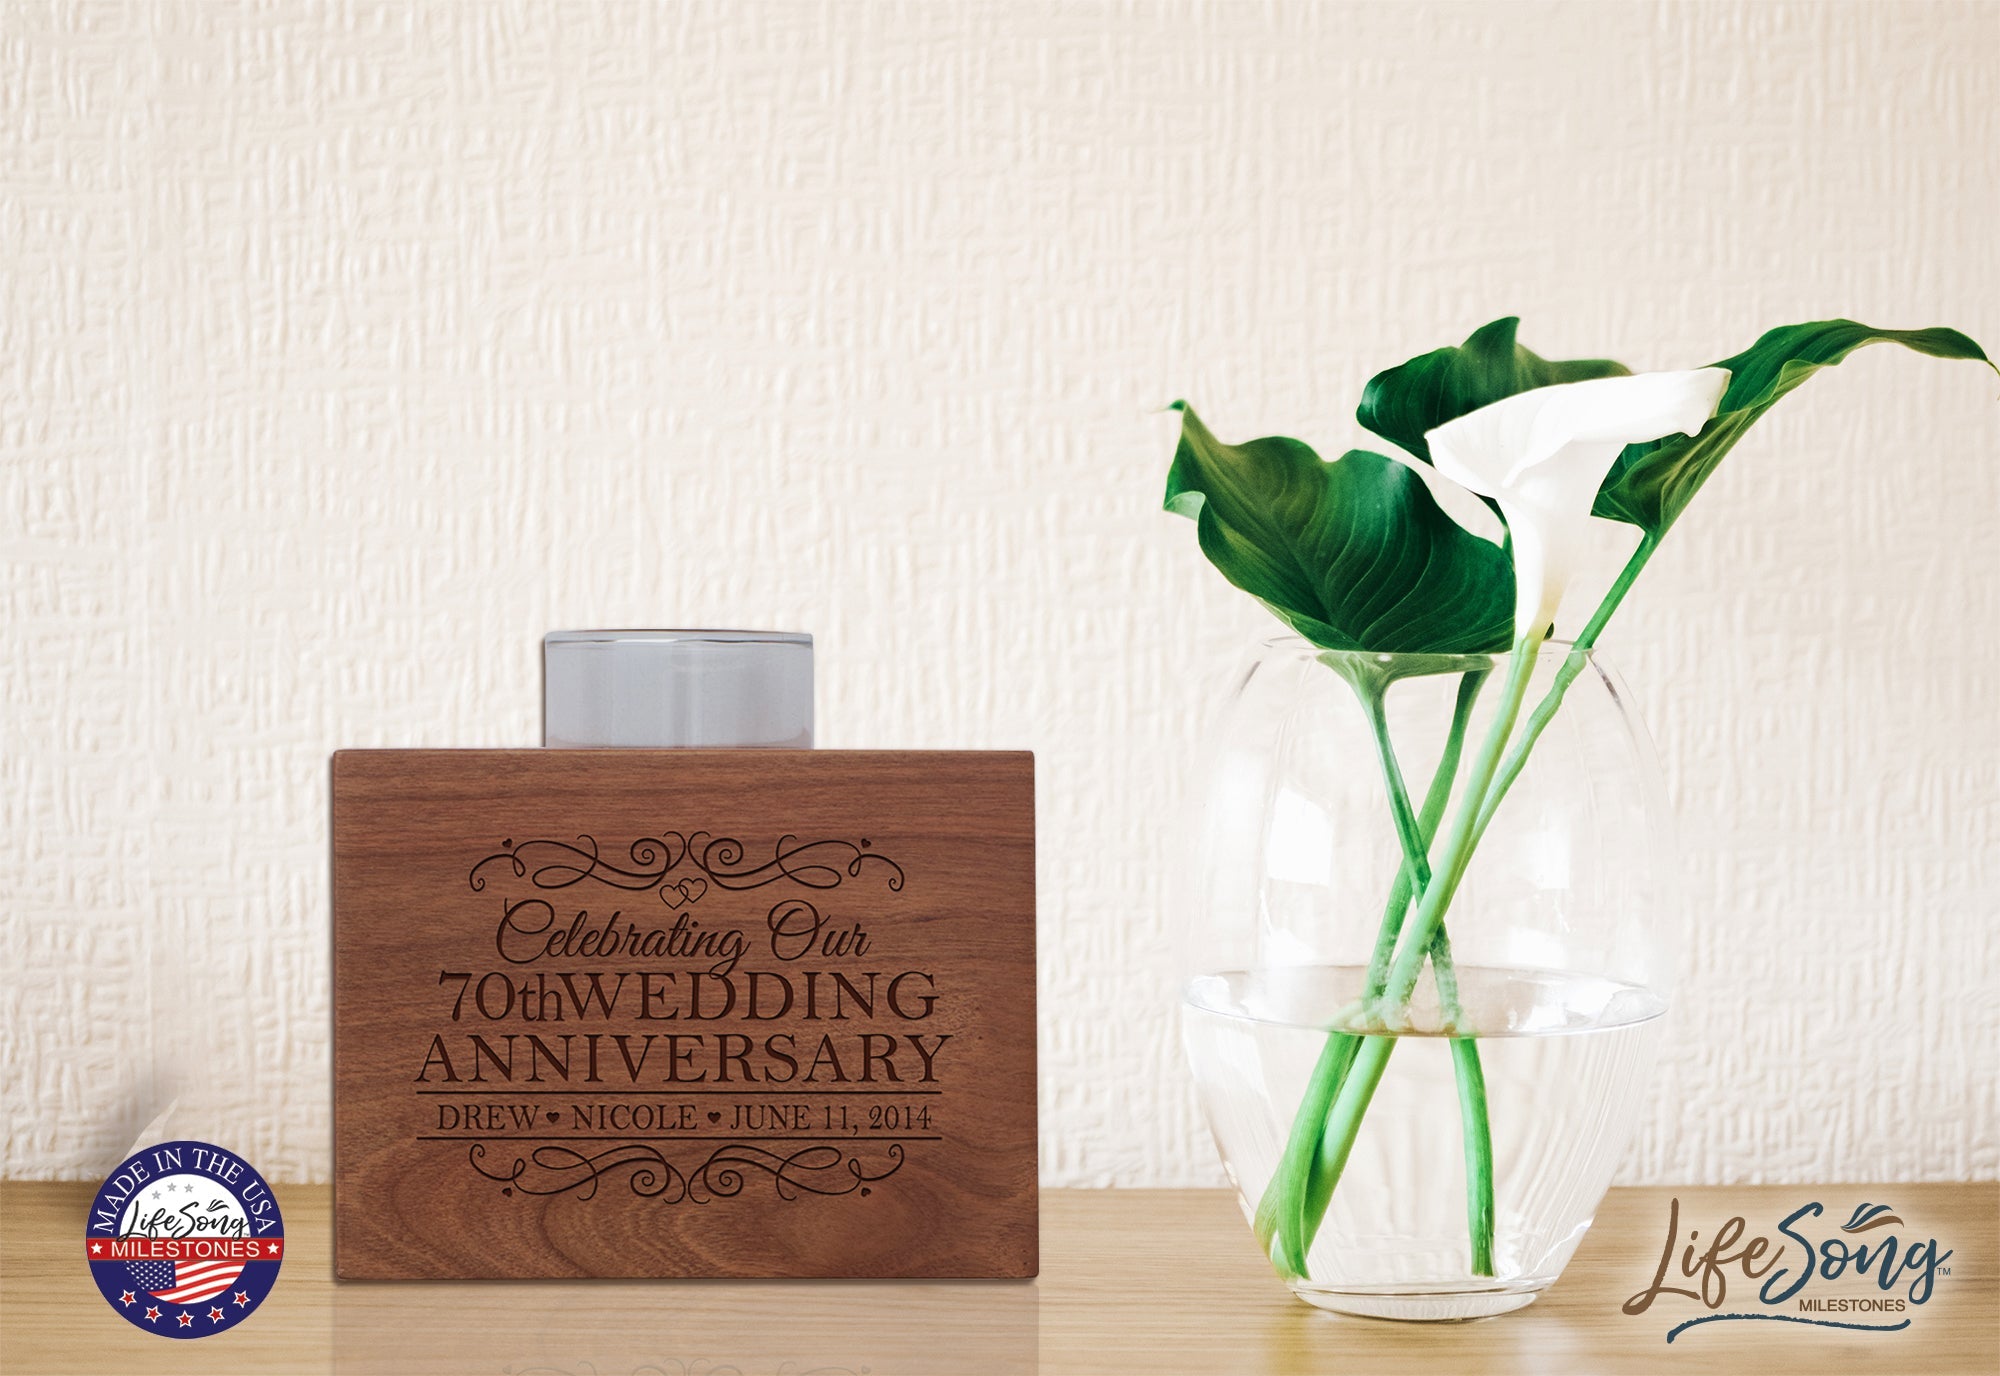 Personalized Cherry Wood Single Votive Candle Holder - 70th Wedding Anniversary - LifeSong Milestones